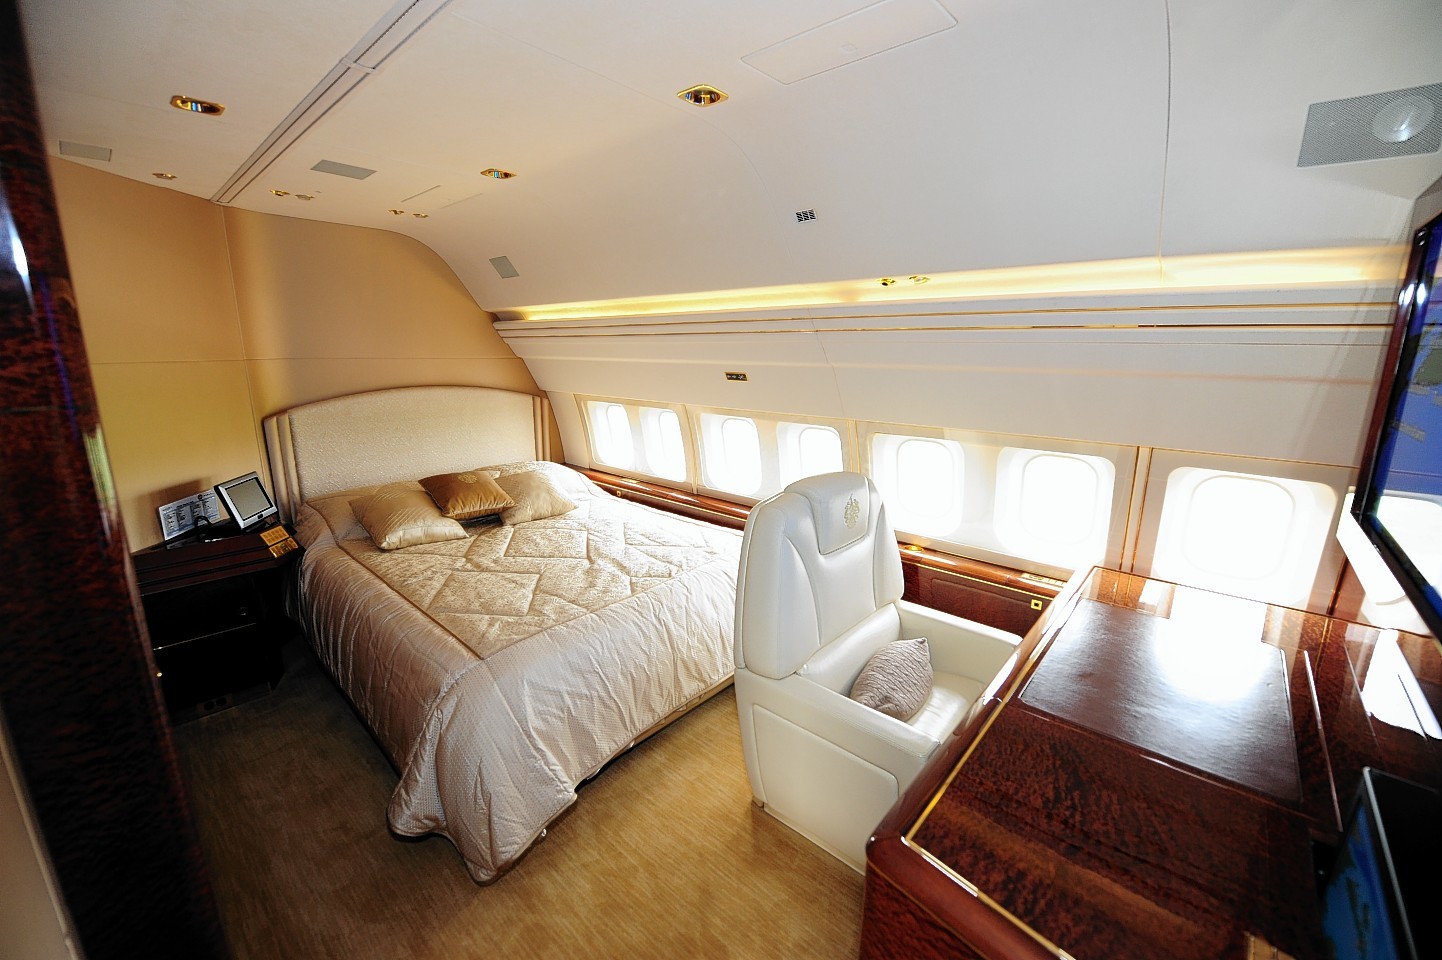 A double bed on Donald Trump's luxury jet